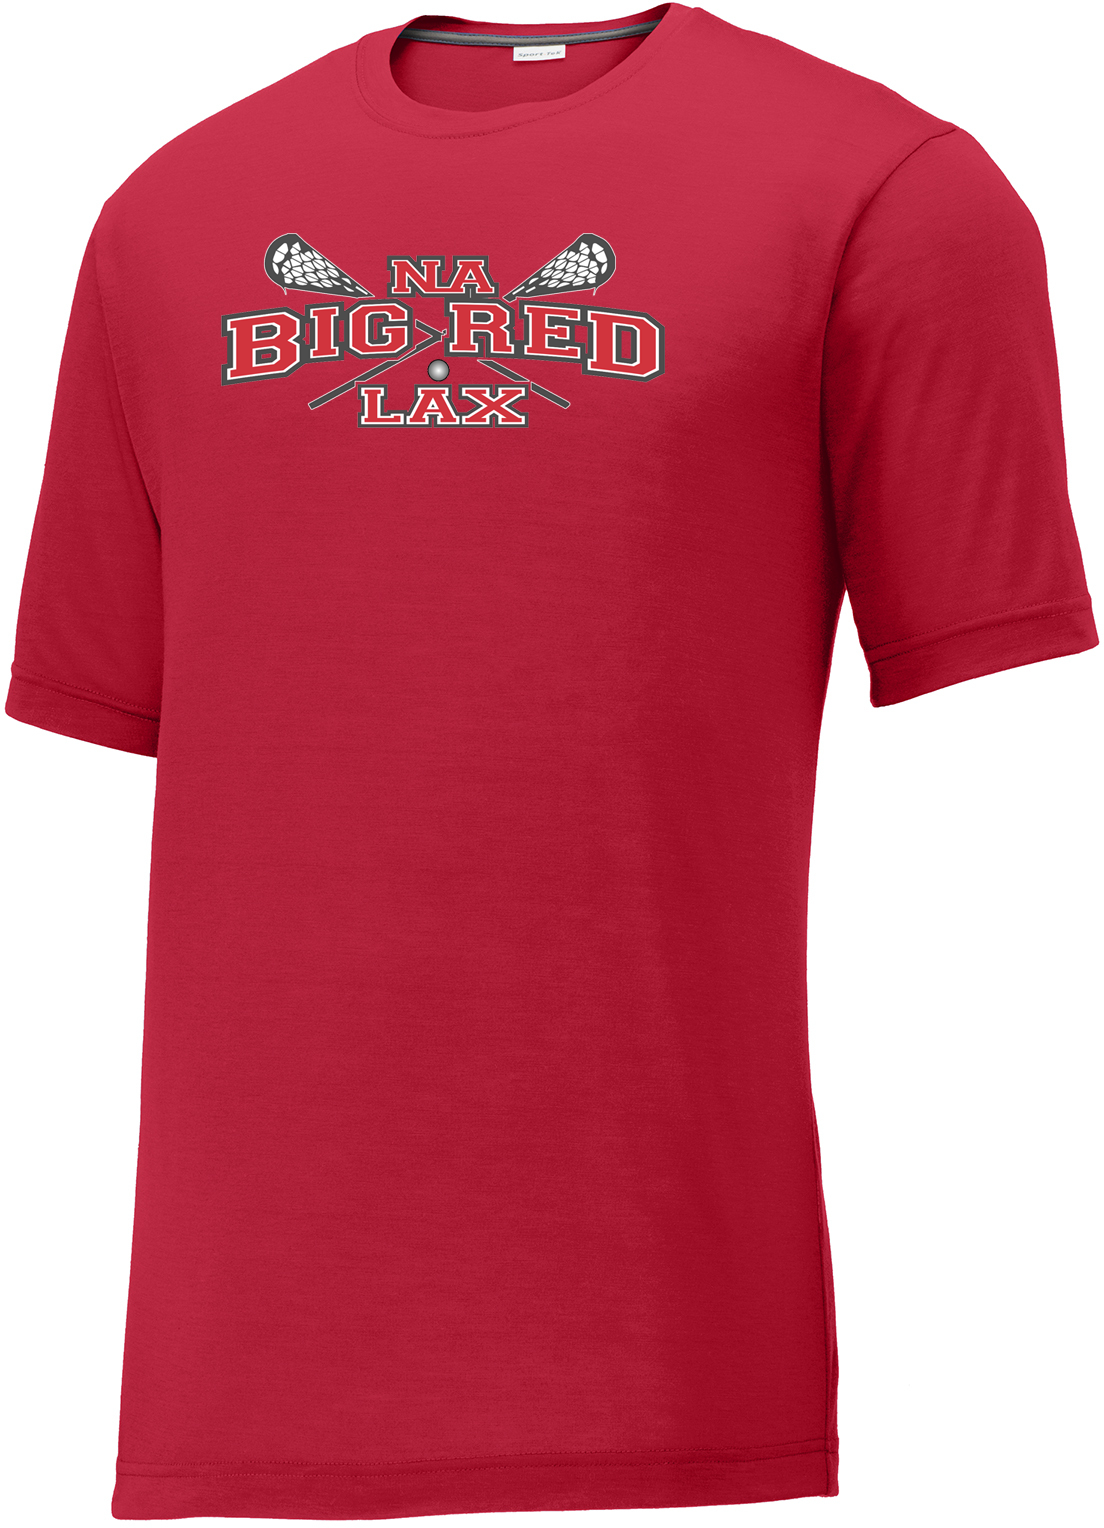 NA Big Red Lax Men's Red CottonTouch Performance T-Shirt